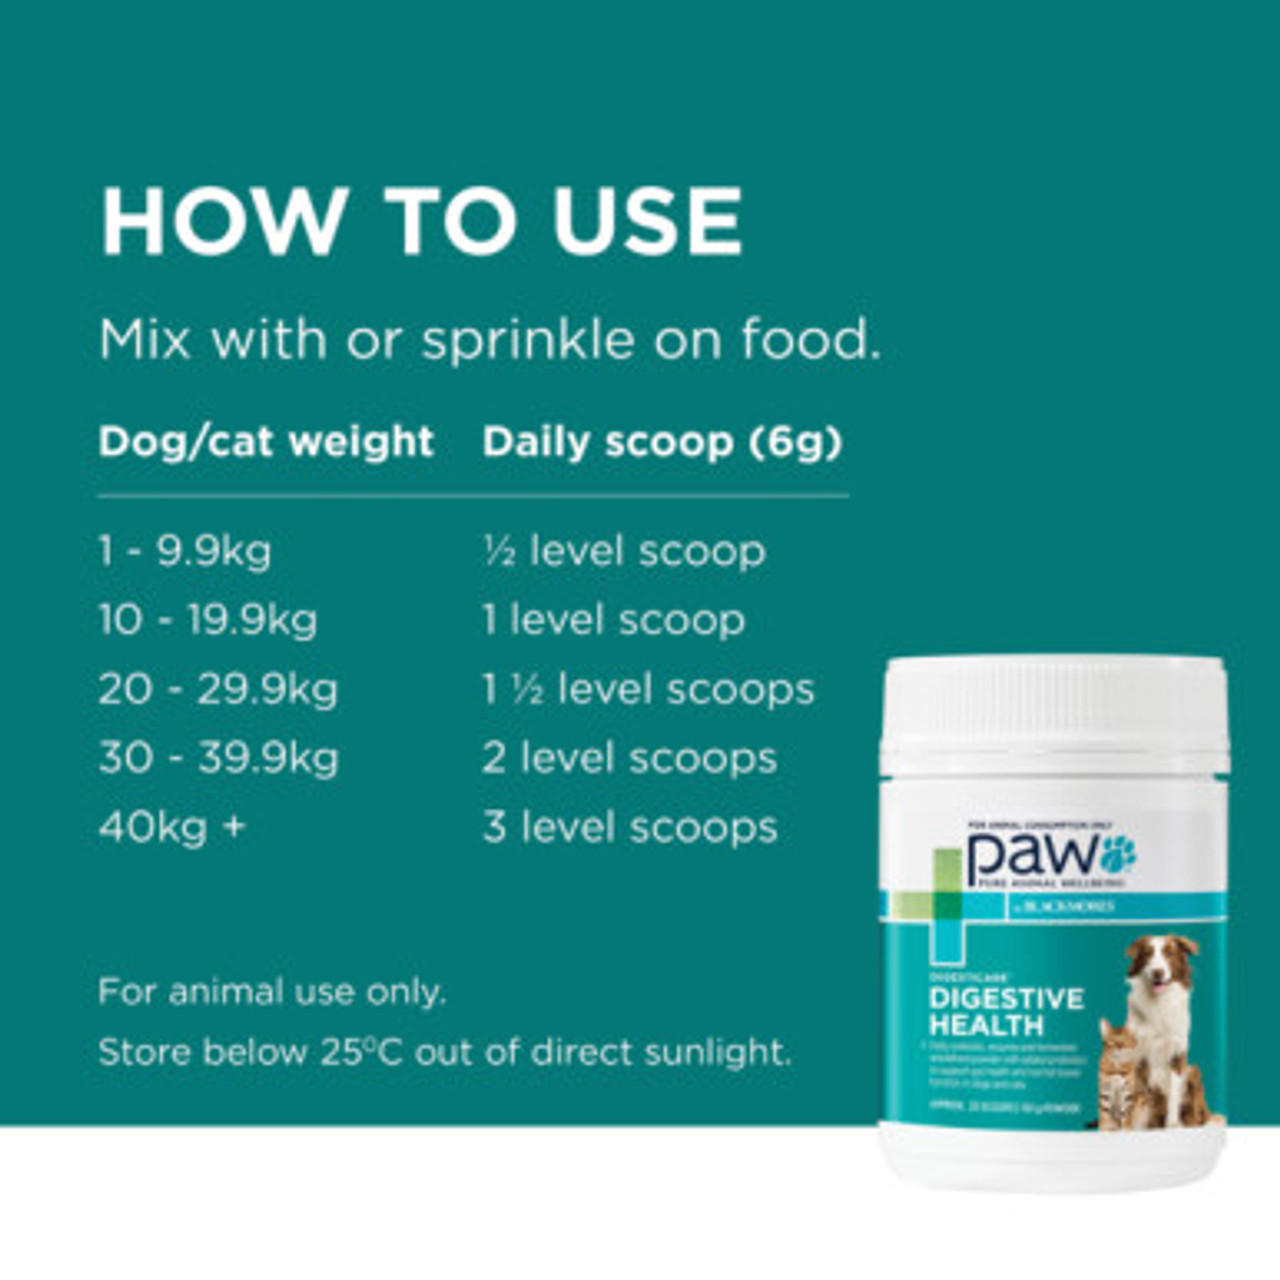 PAW By Blackmores DigestiCare Digestive Health Probiotic For Dogs And Cats 150g